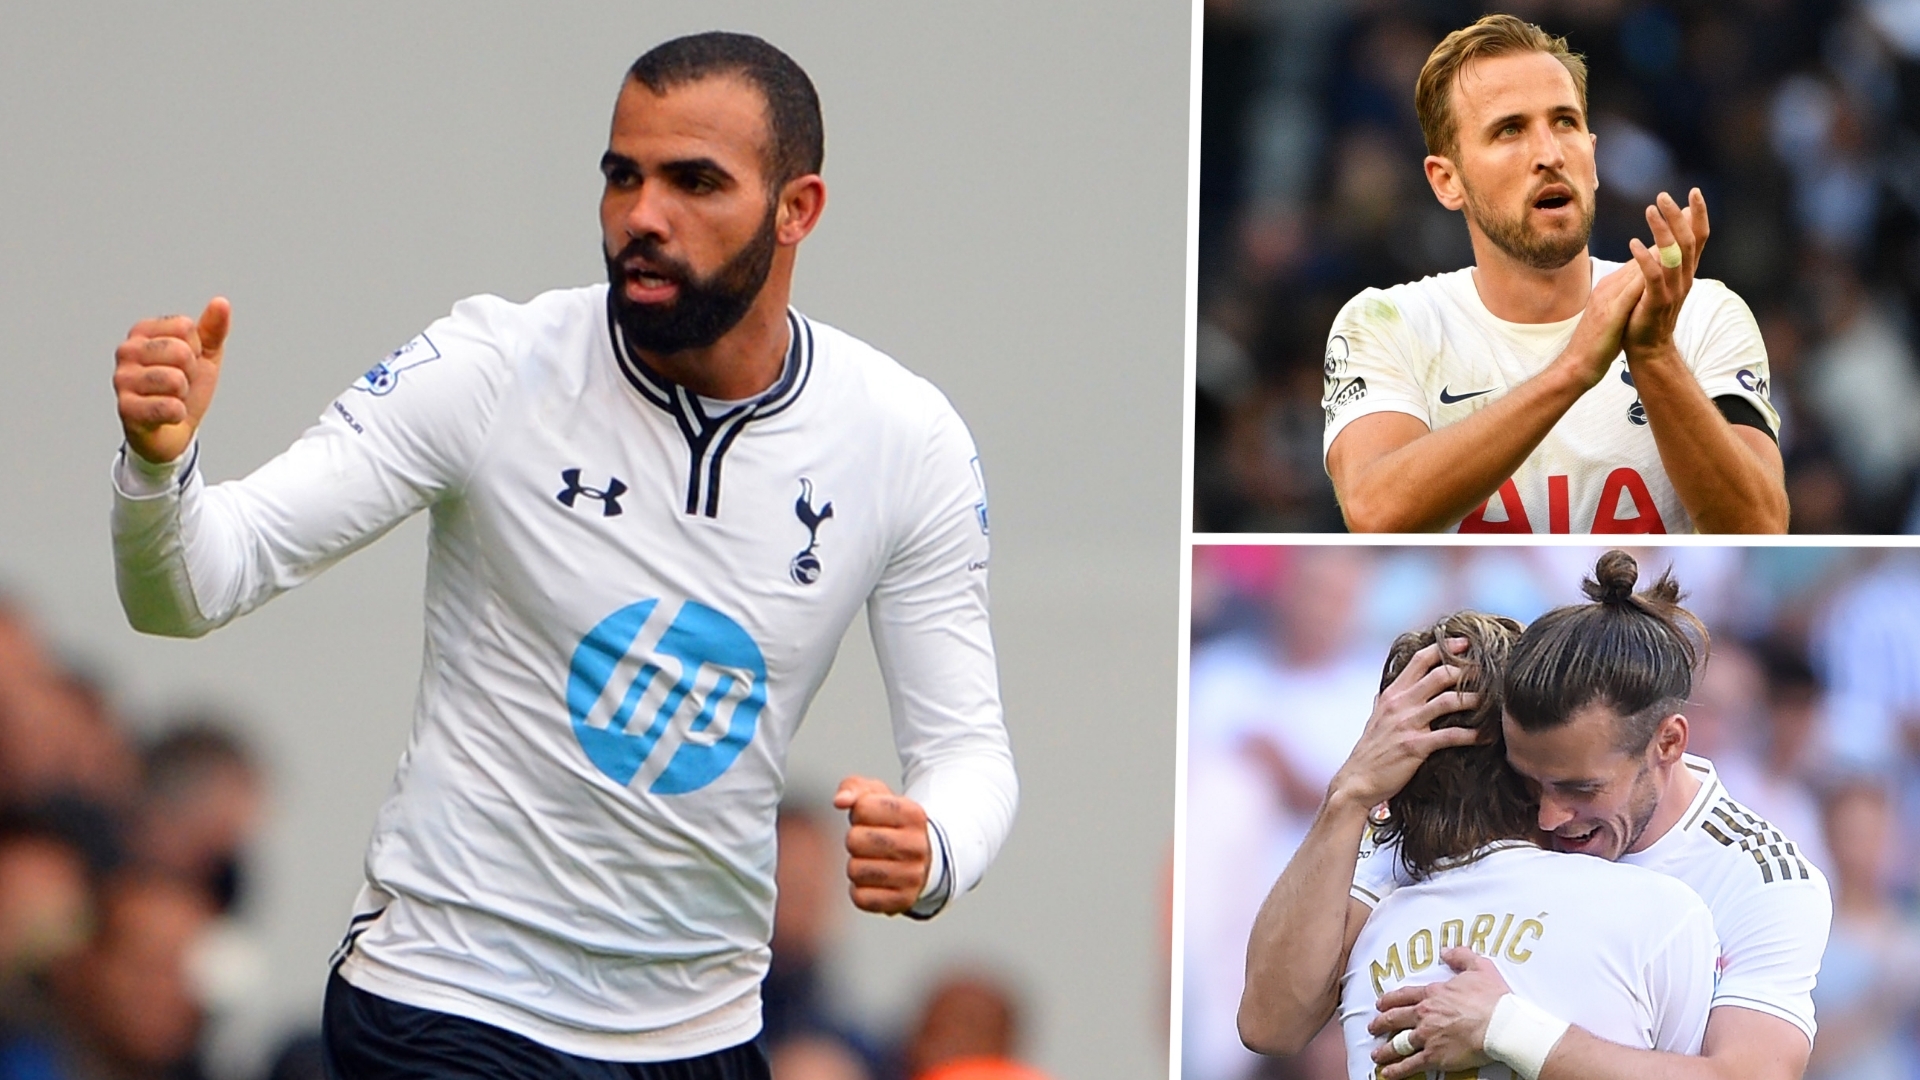 Talloos nauwkeurig Chronisch I didn't expect Kane or Modric to become the best players in the world' -  Sandro opens up on Tottenham exit, snubbing Man City and Bale's brilliance  | Goal.com